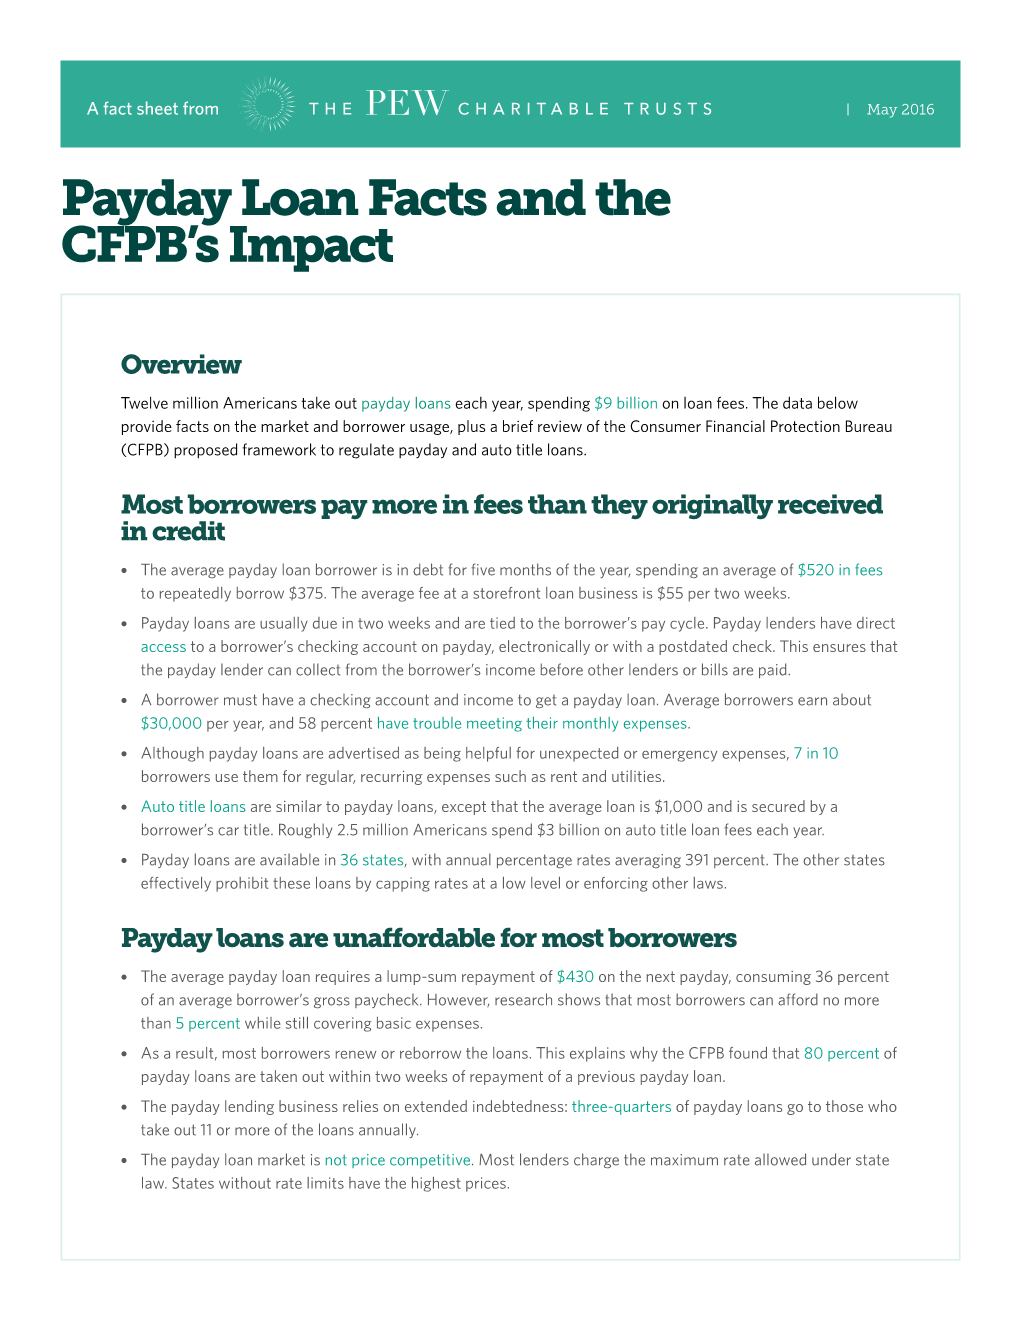 Payday Loan Facts and the CFPB's Impact